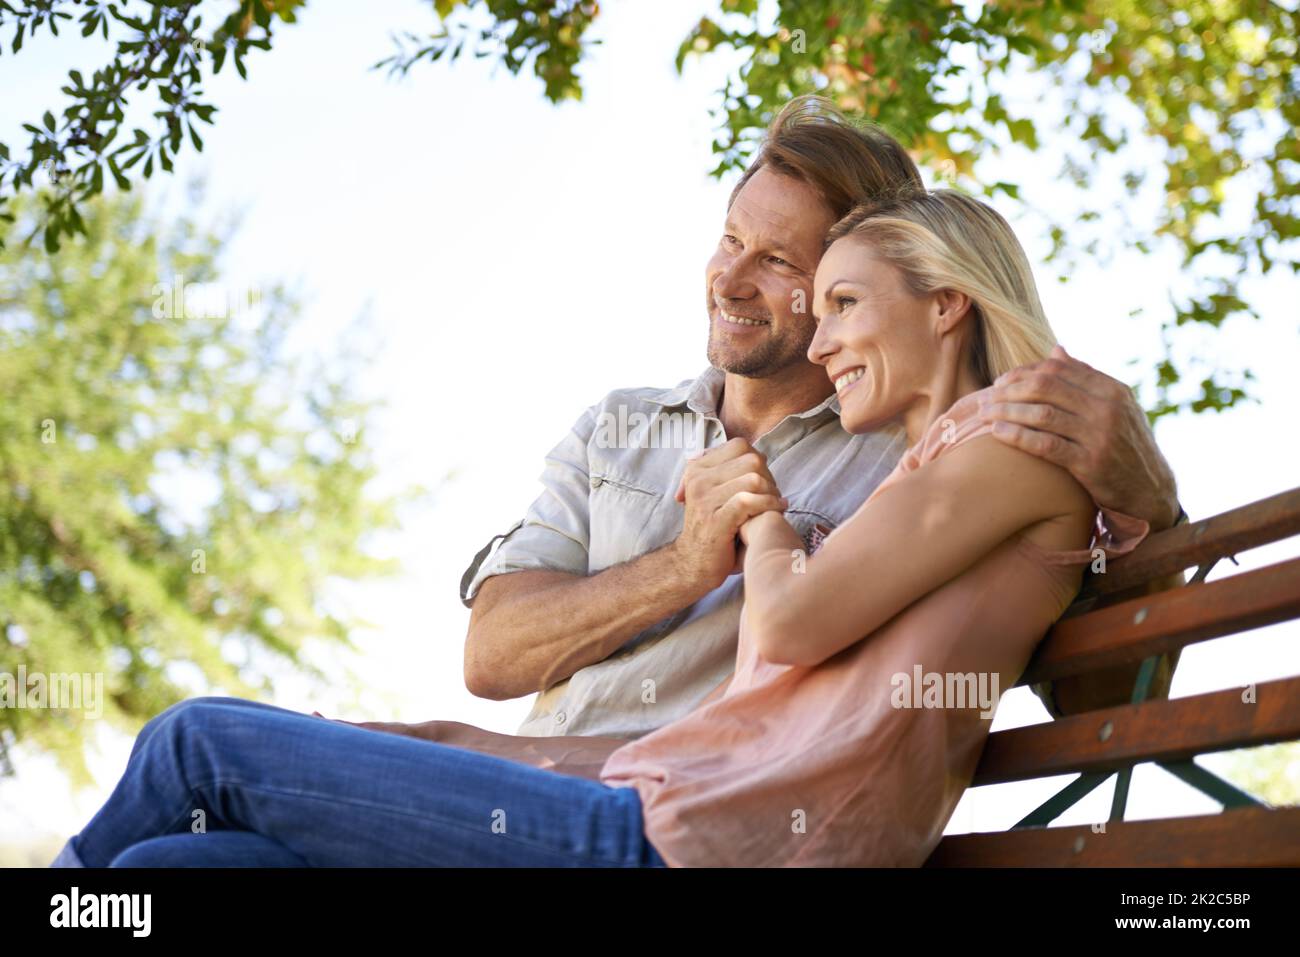 Love is inspired by the simplicity of nature. Shot of a happy mature couple sitting on a bench in the park. Stock Photo